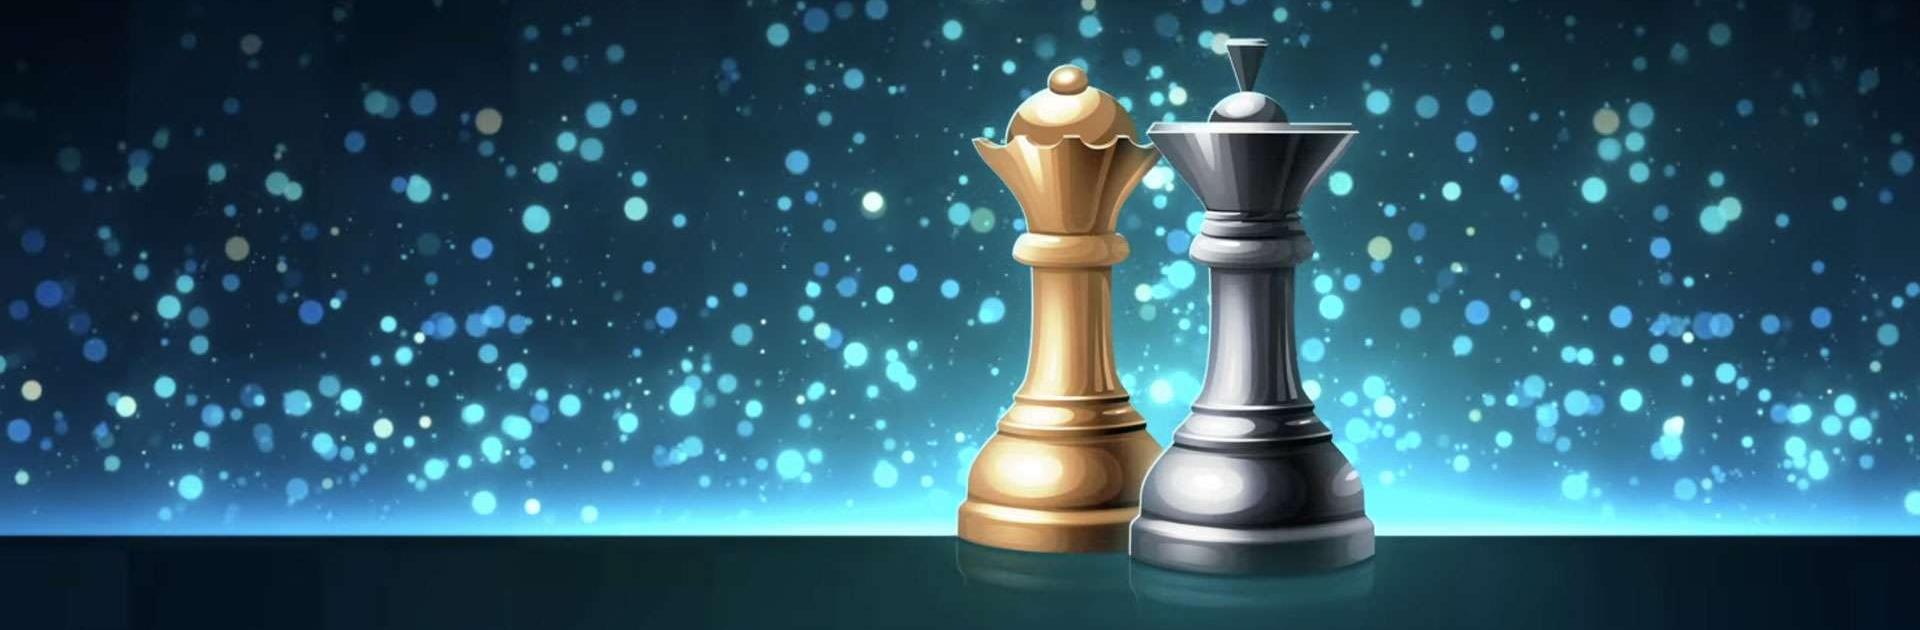 Play Chess - Offline Board Game Online